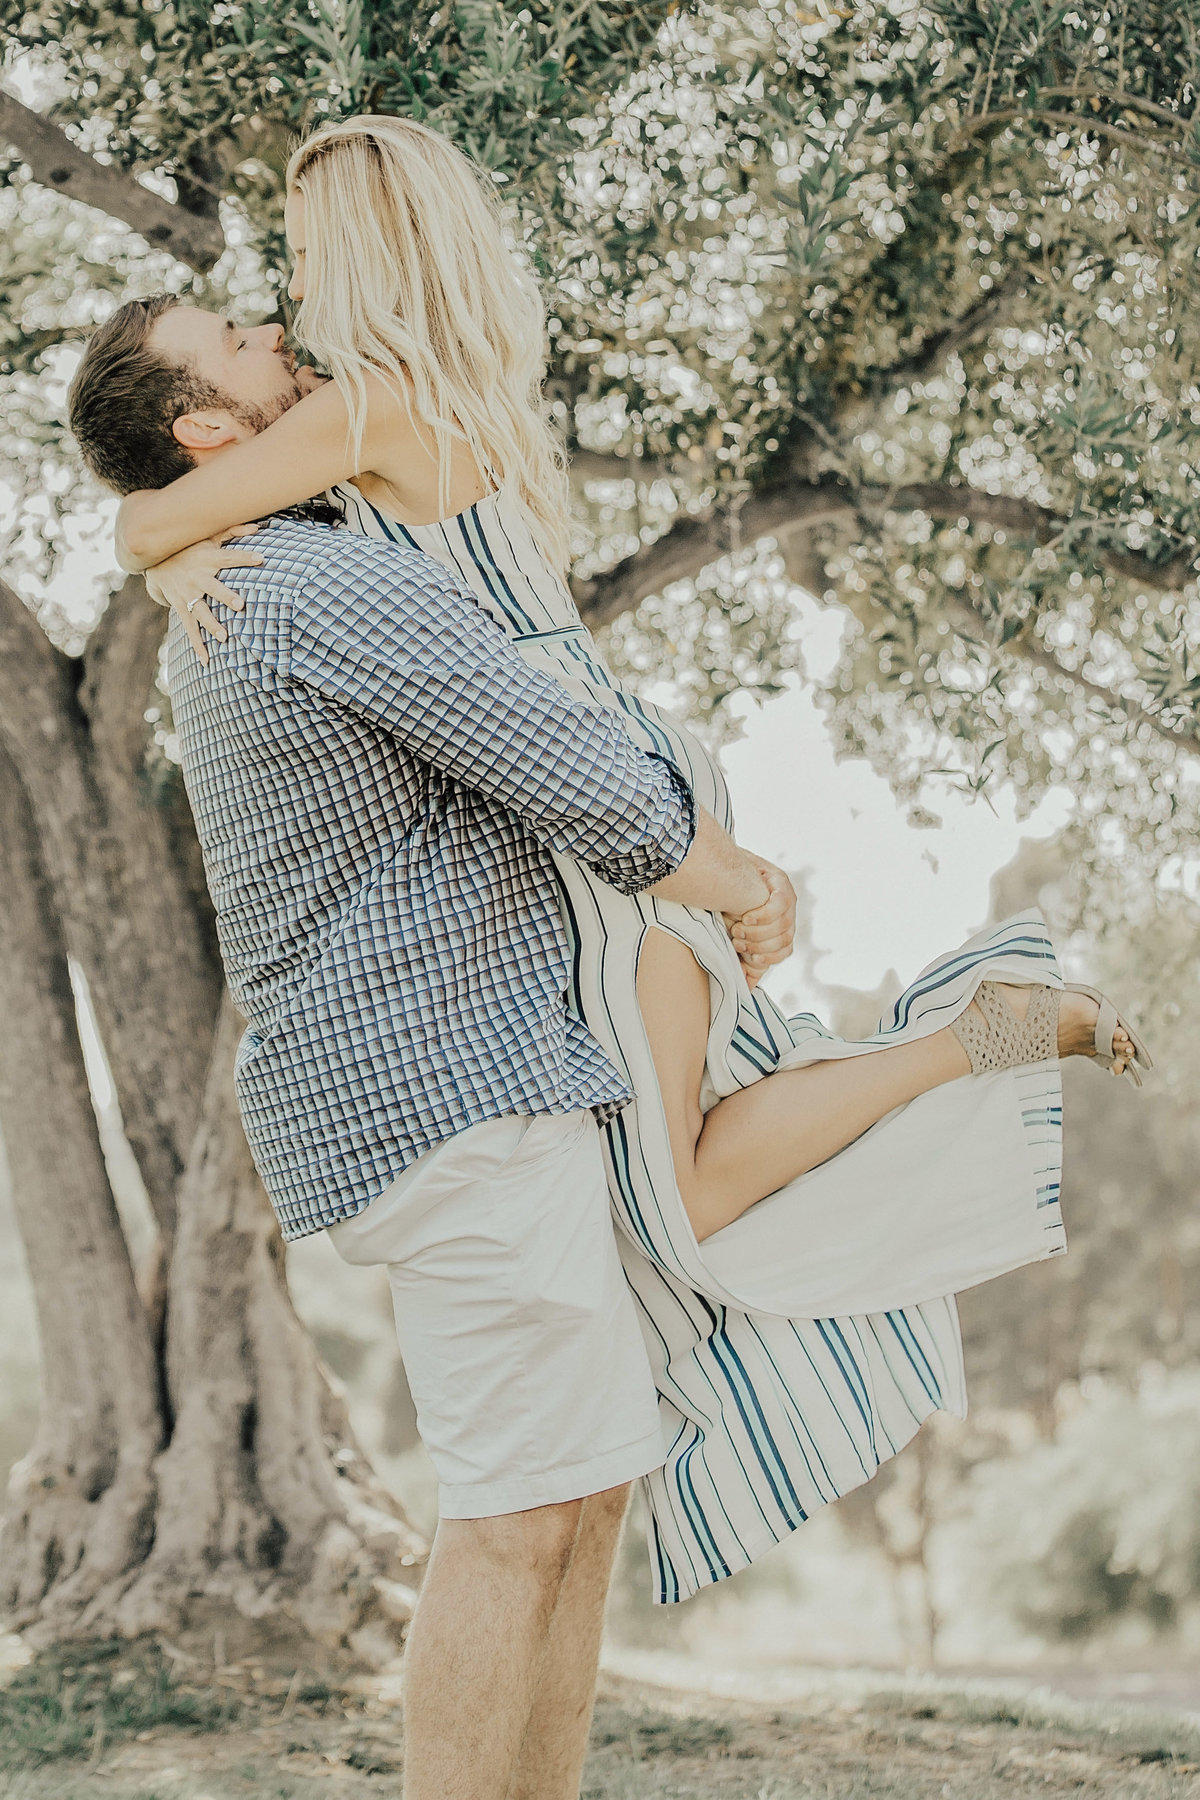 Babsie-Ly-Photography-Fine-Art-Film-Surprise-Proposal-Photographer-Temecula-Thornton-Winery-California-009